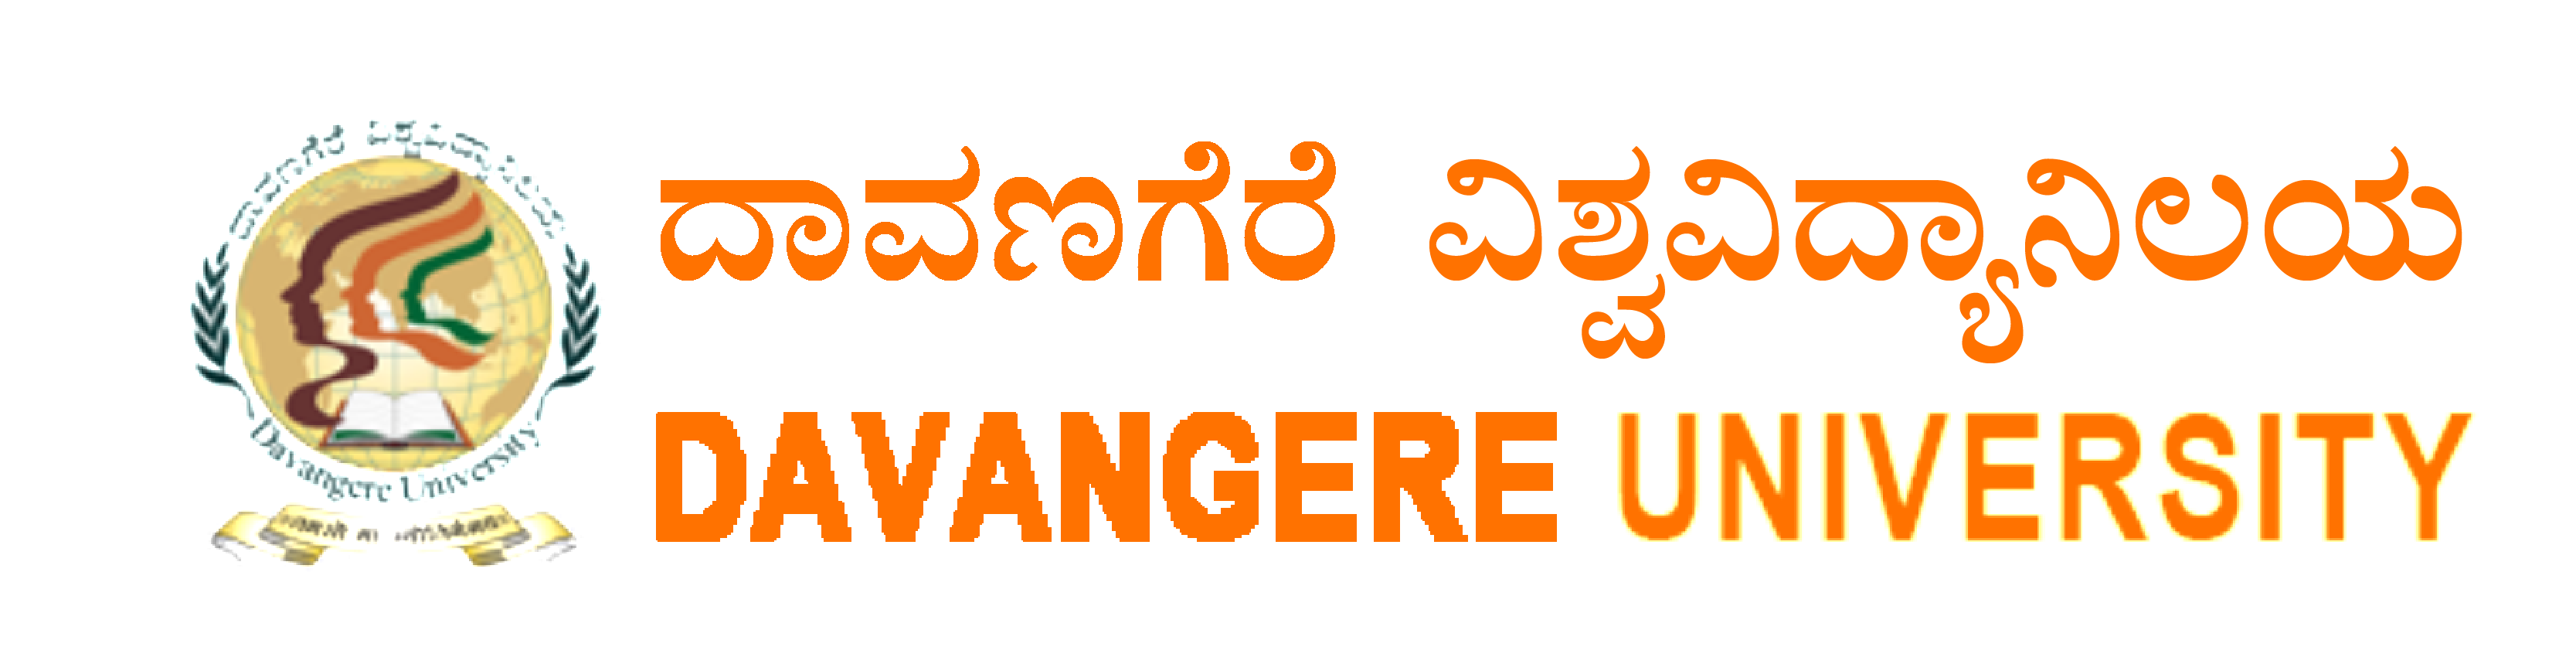 Davangere University Admissions [year] - Courses Offered, Fees, Latest Updates 1